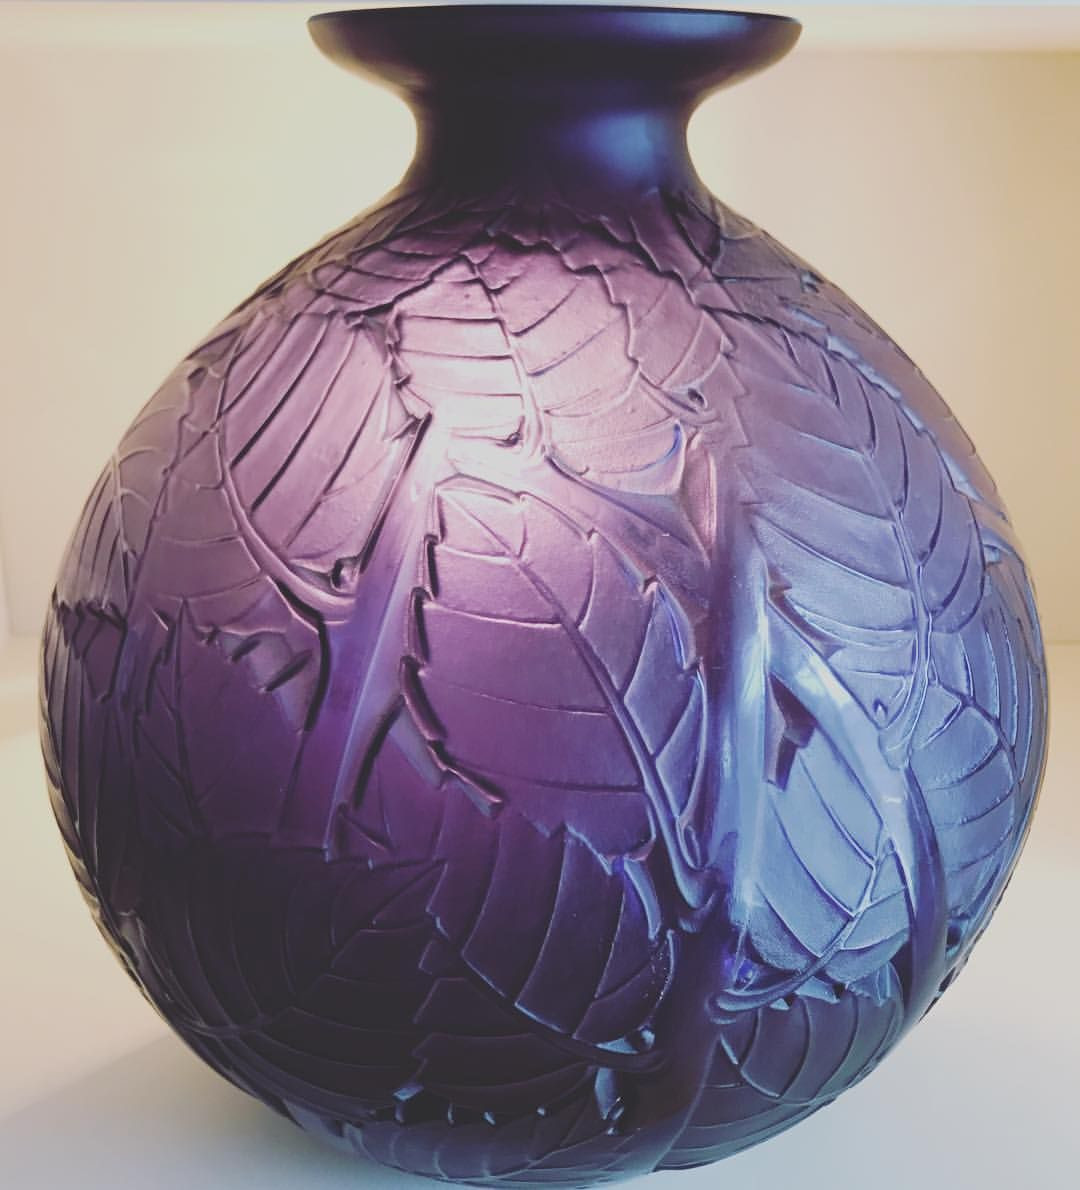 17 Stylish Lalique Sylvie Vase 2024 free download lalique sylvie vase of 439 best lalique glass images on pinterest in 2018 perfume bottles intended for 439 best lalique glass images on pinterest in 2018 perfume bottles art nouveau and glas